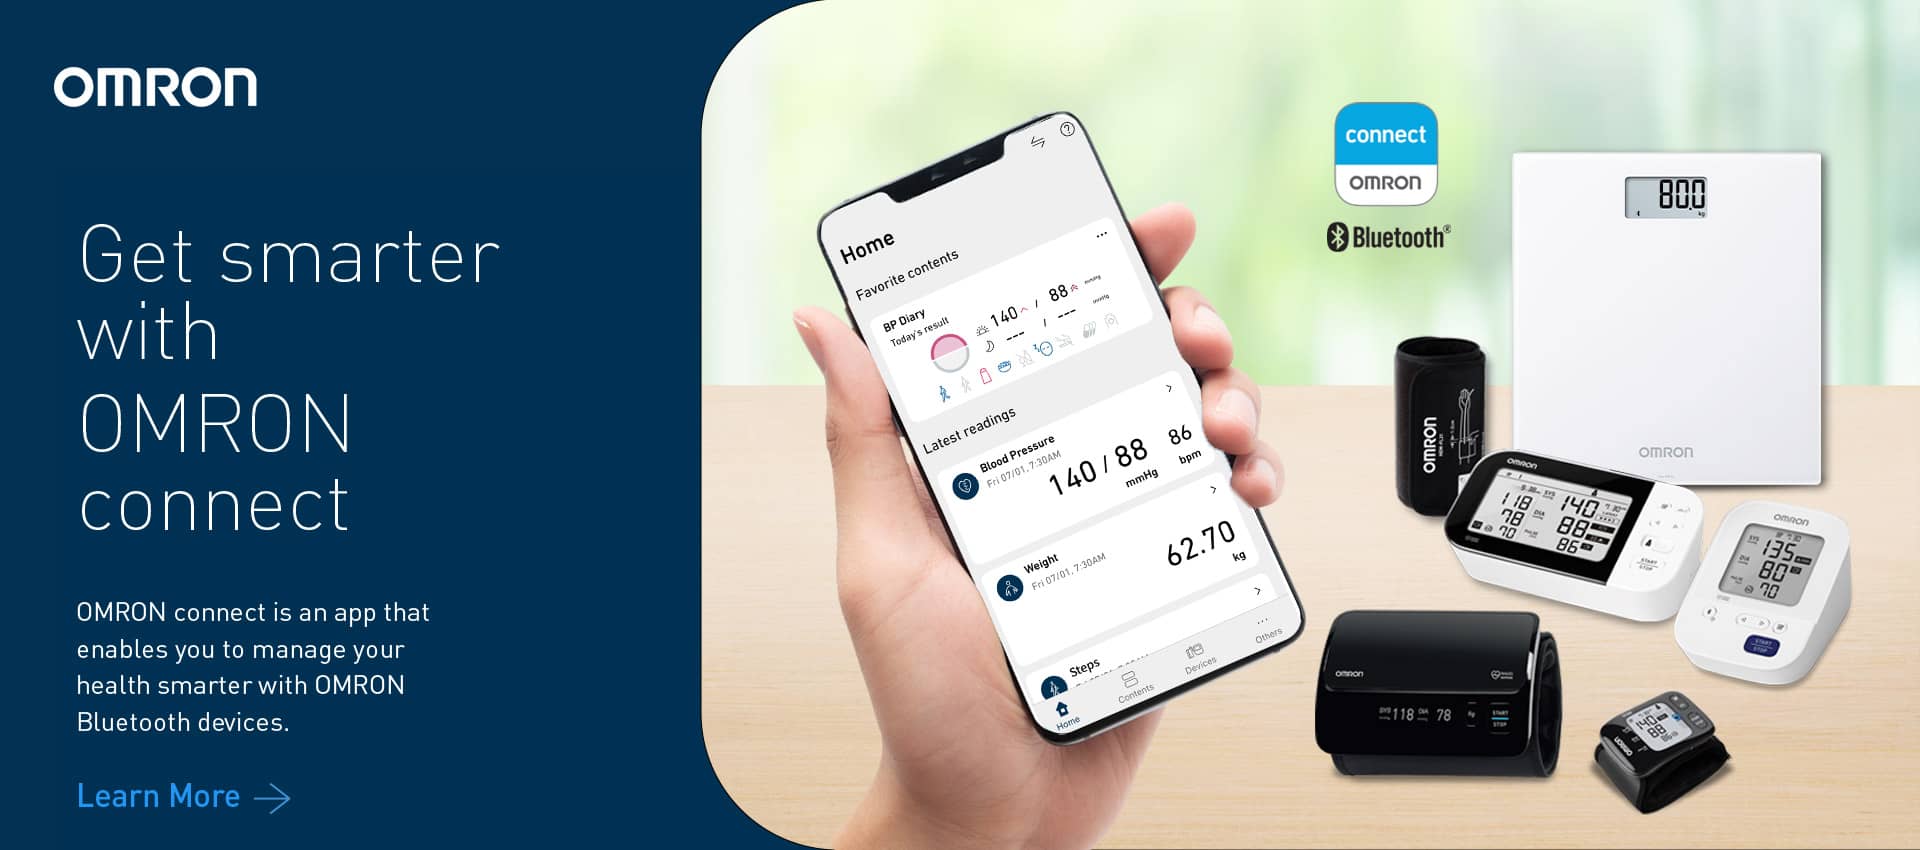 Get Smarter with Omron Connect App